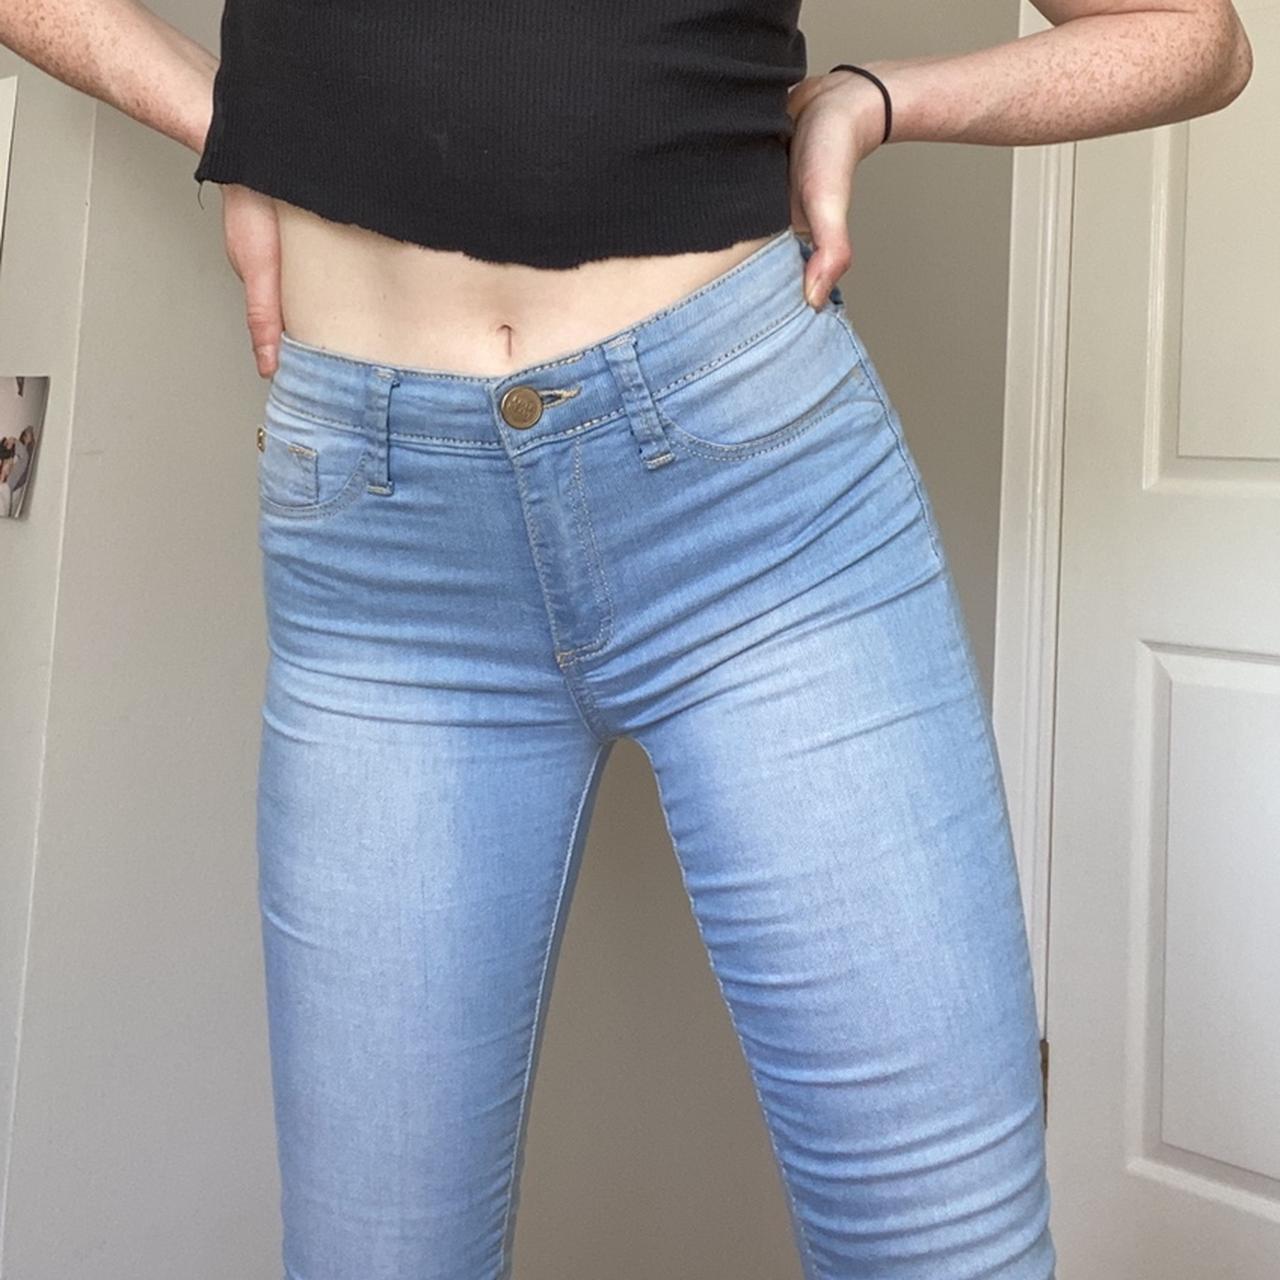 A girl wearing sexy tight jeans, frontal view.